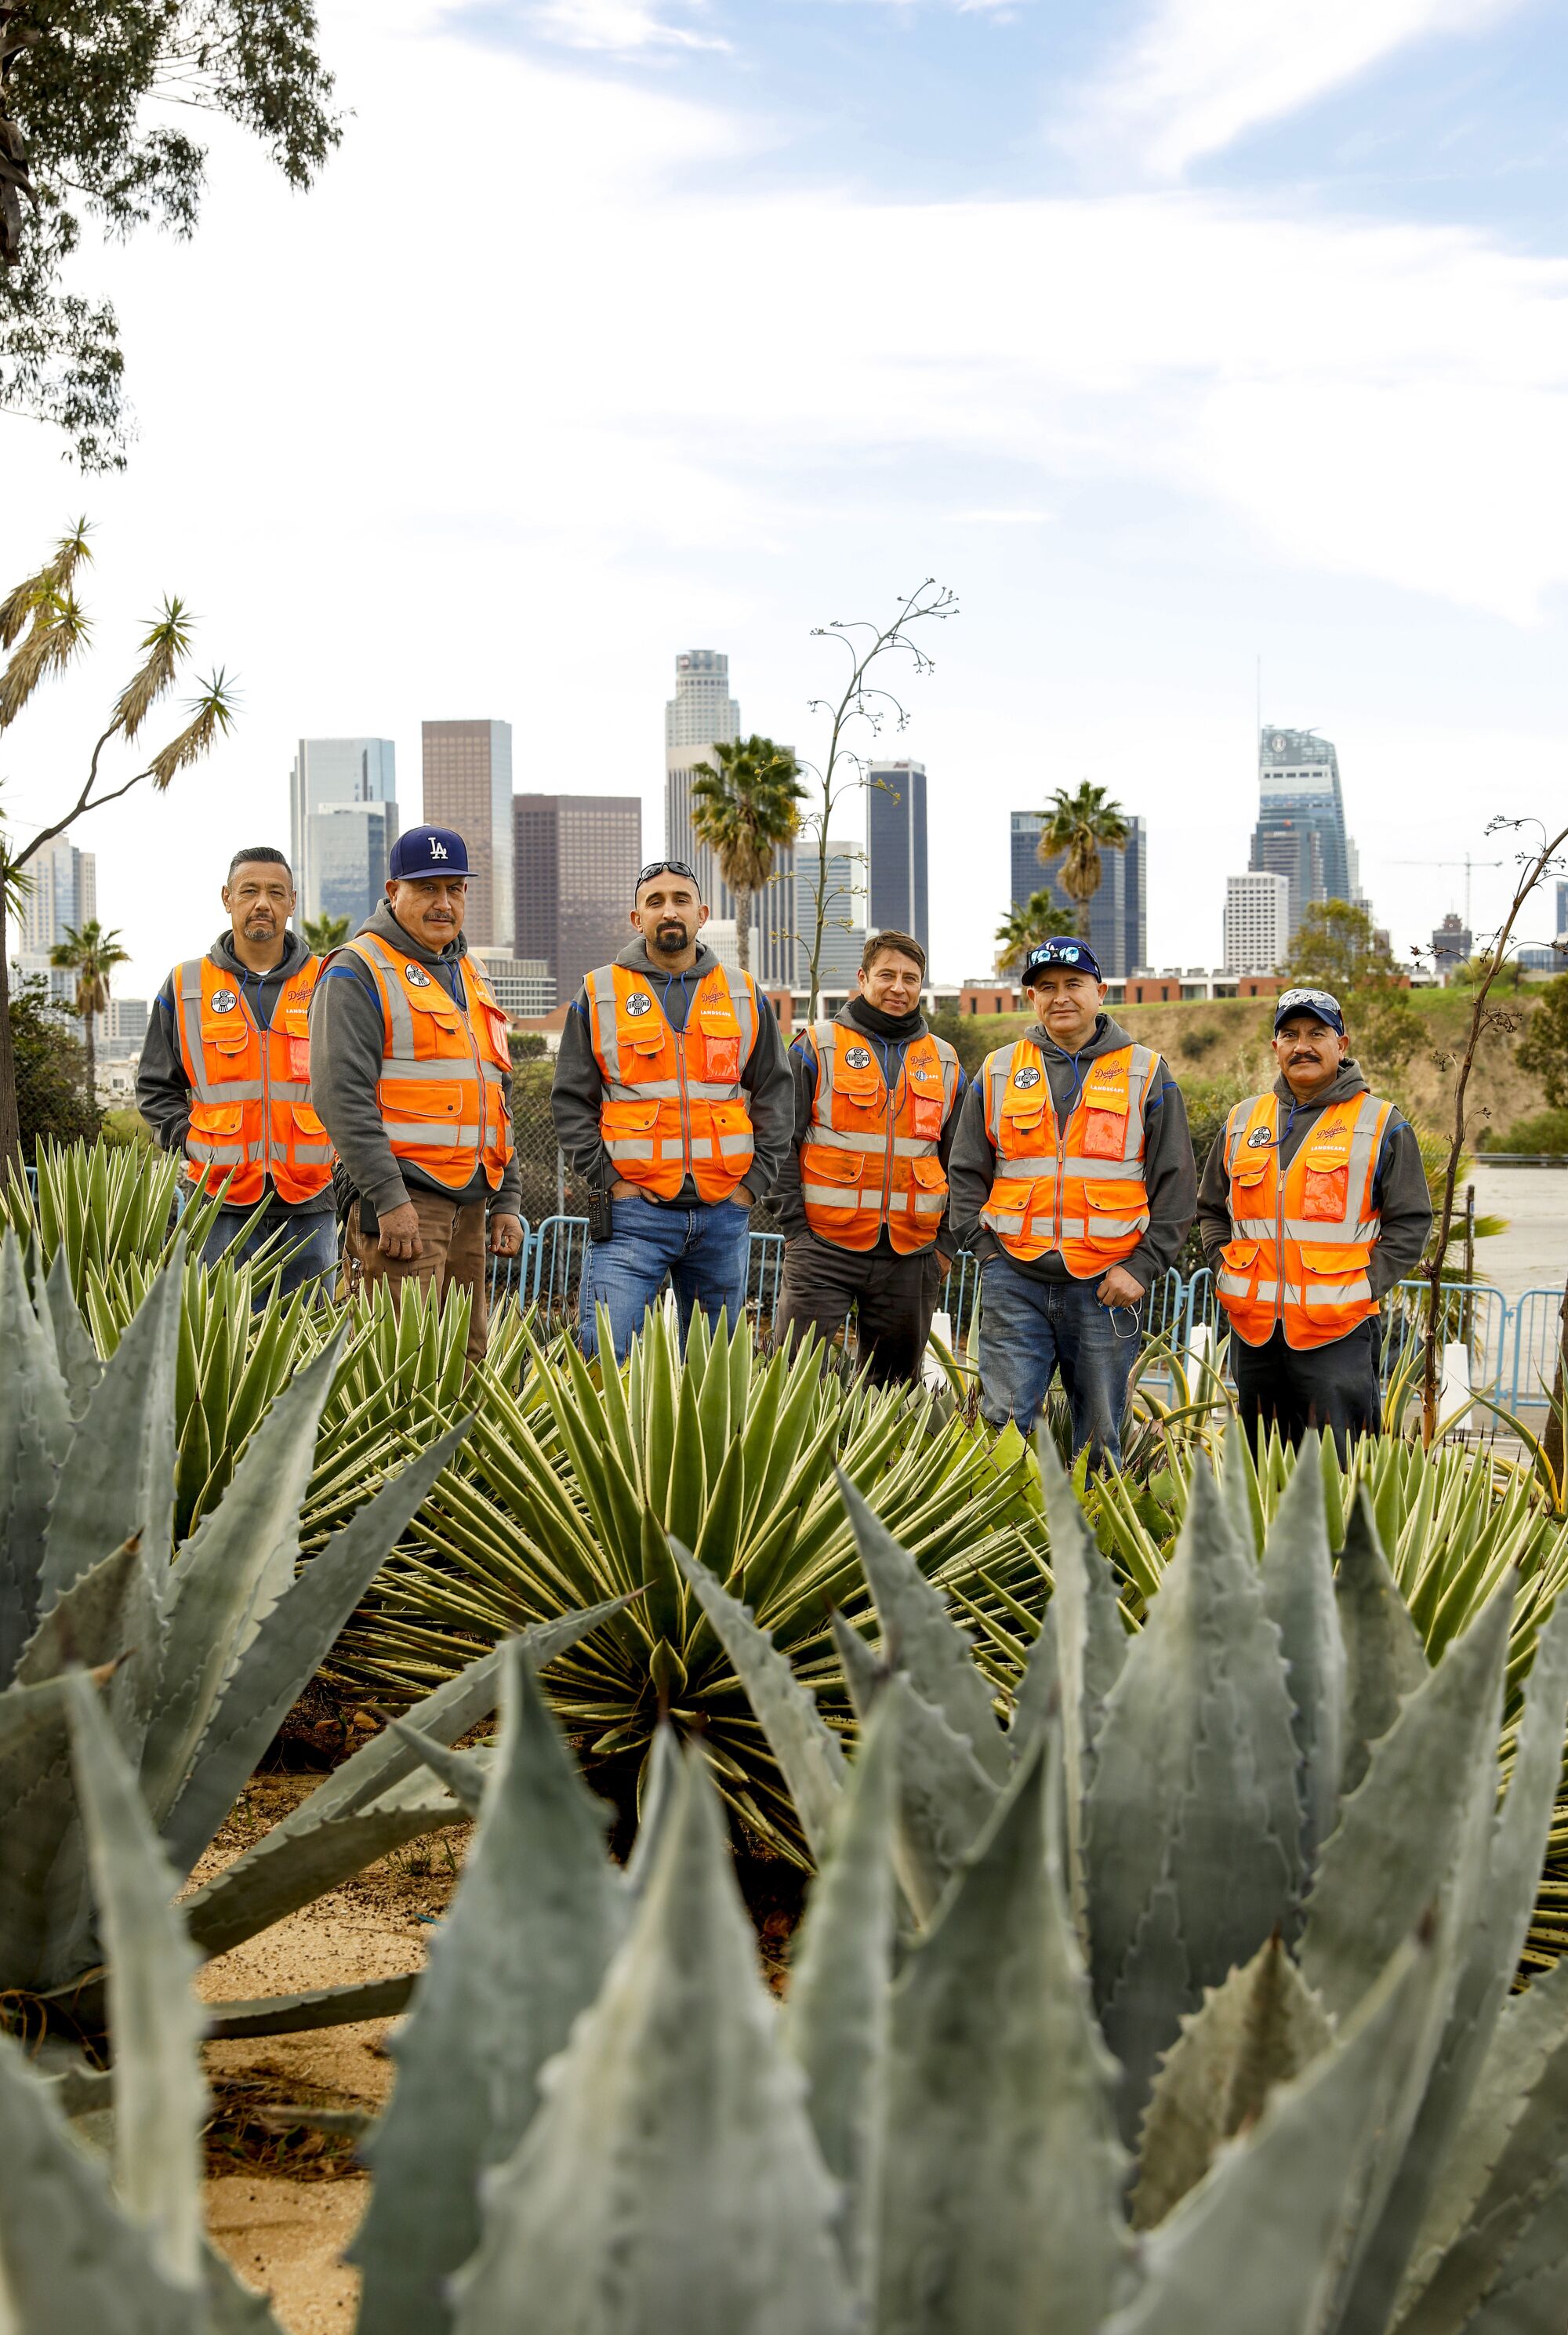 Chaz Perea and his landscaping team stand among 22 varieties of agaves with downtown L.A. in the background.